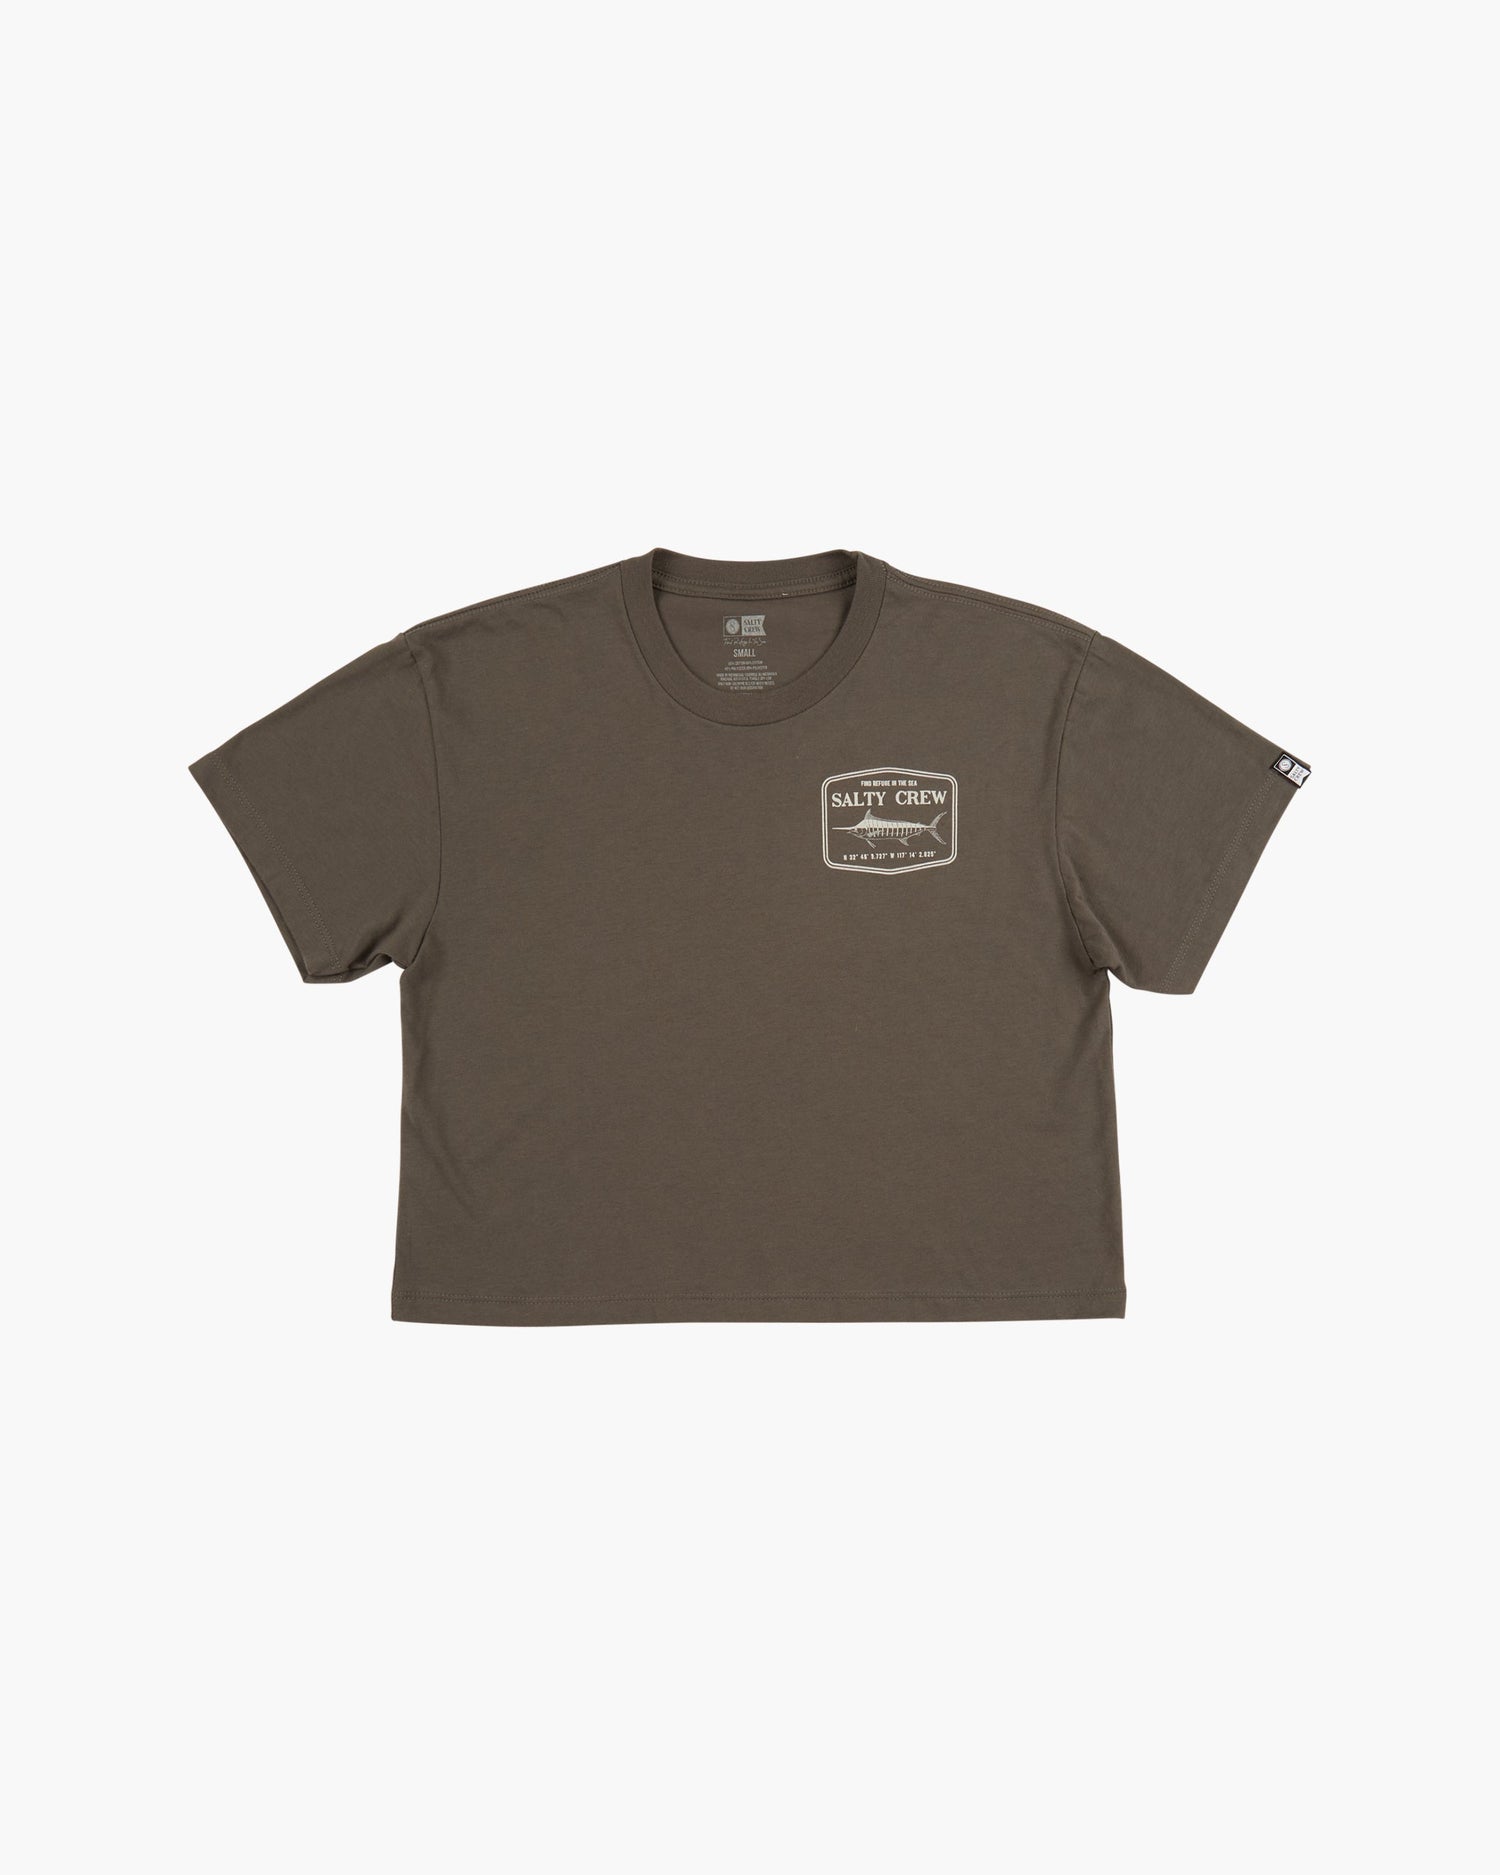 STEALTH SKIMMER TEE - Charcoal